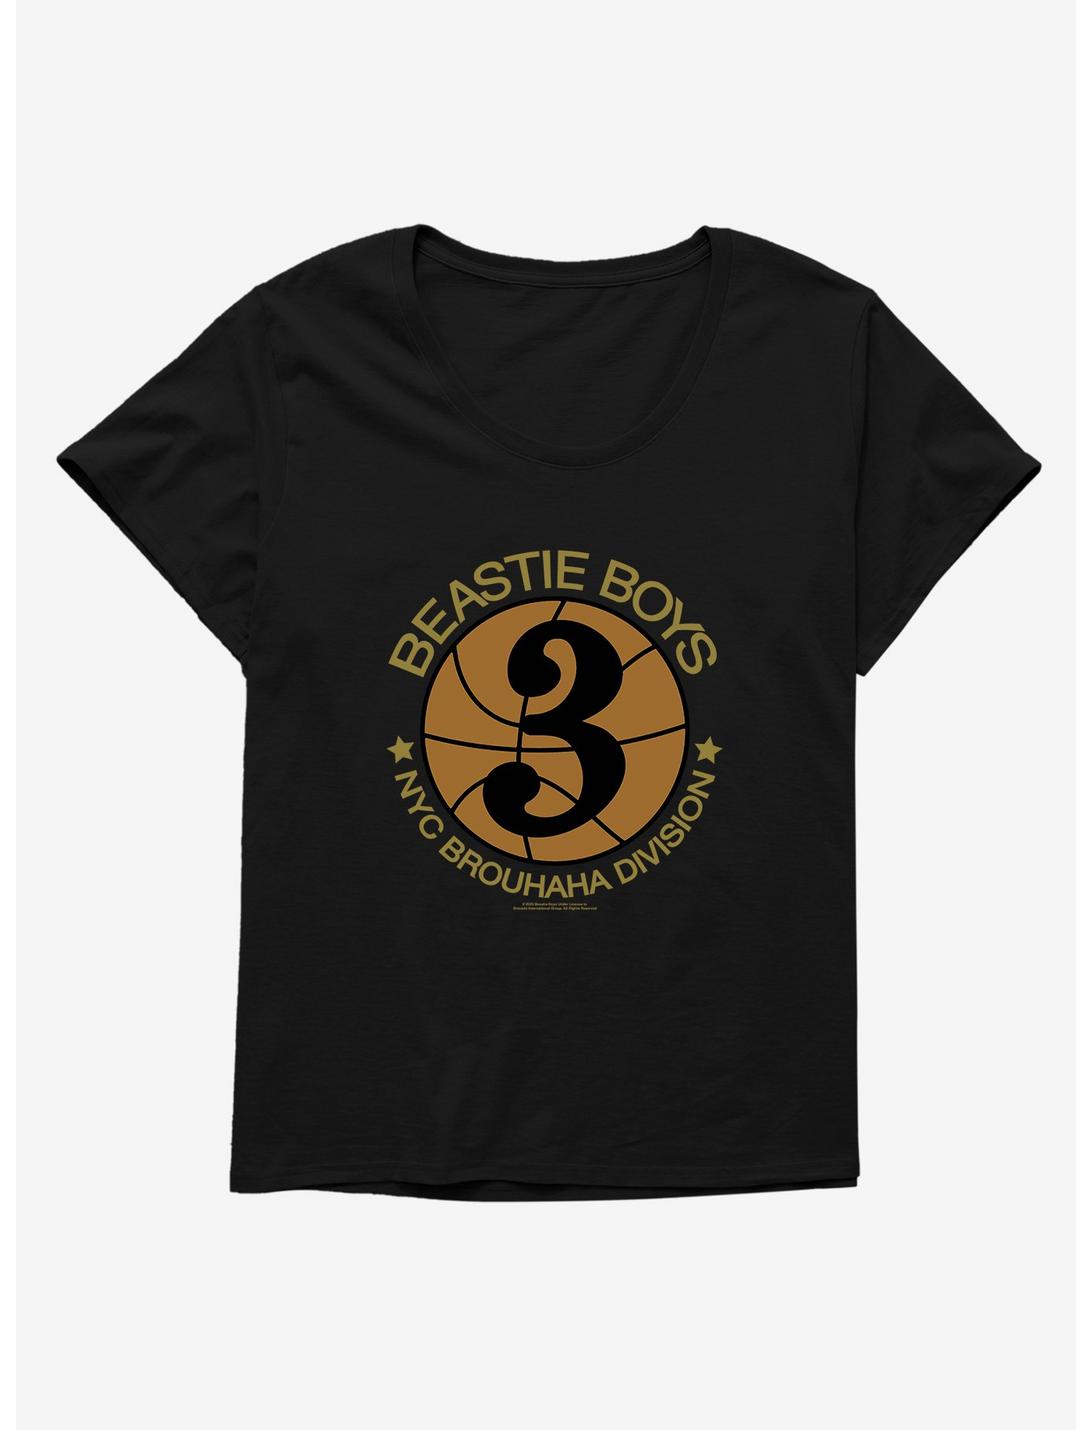 Beastie Boys NYC Brouhaha Division Womens T-Shirt Plus Size, BLACK, hi-res